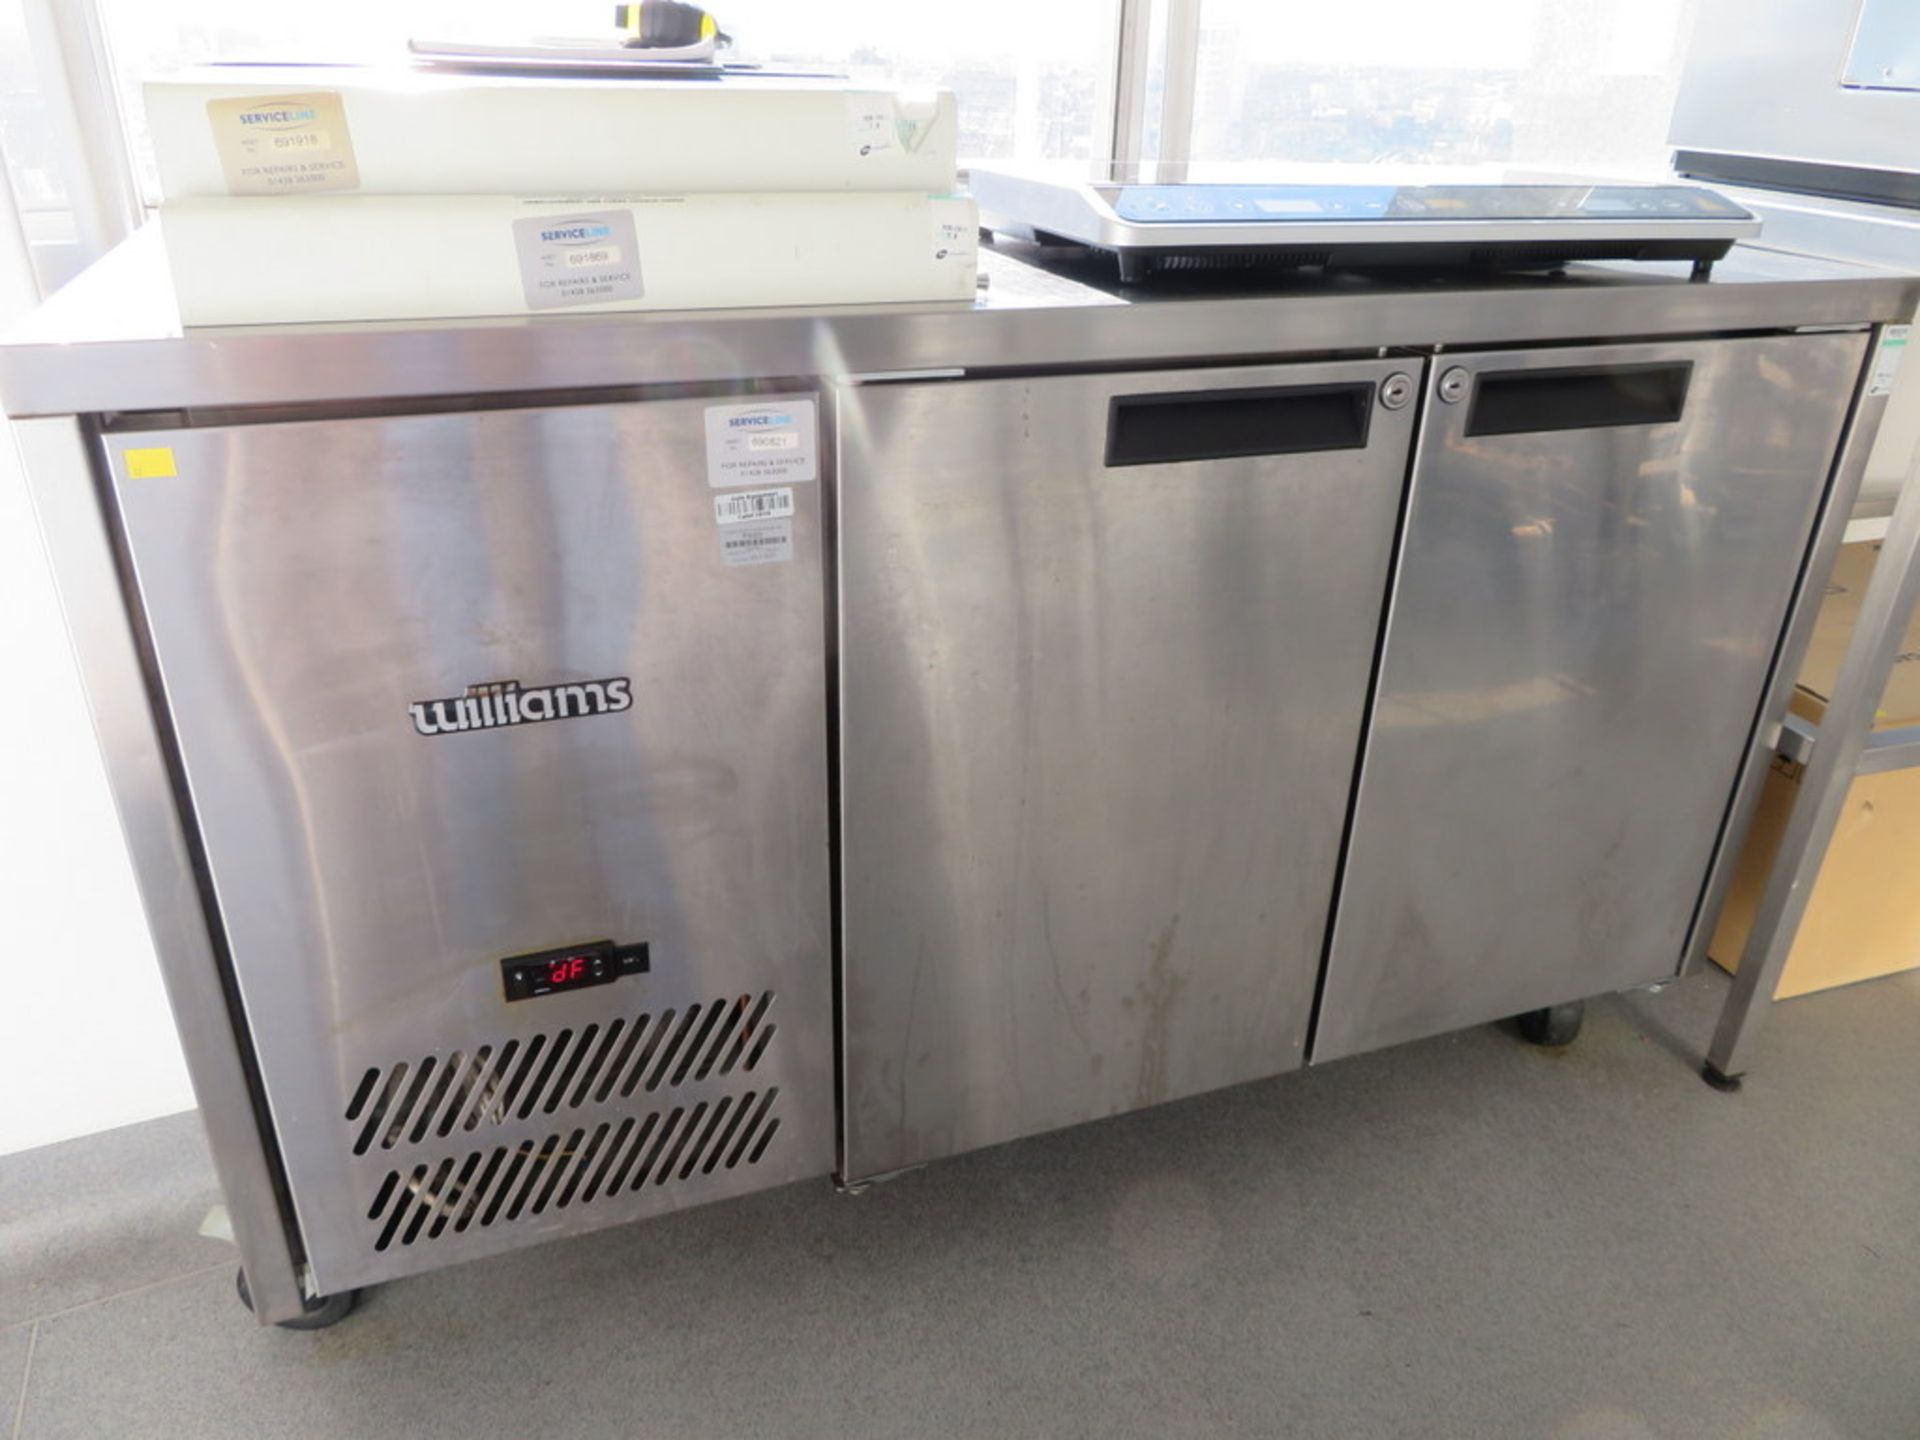 WILLIAMS MODEL HJC25A STAINLESS STEEL DOUBLE DOOR COUNTER REFRIGERATOR